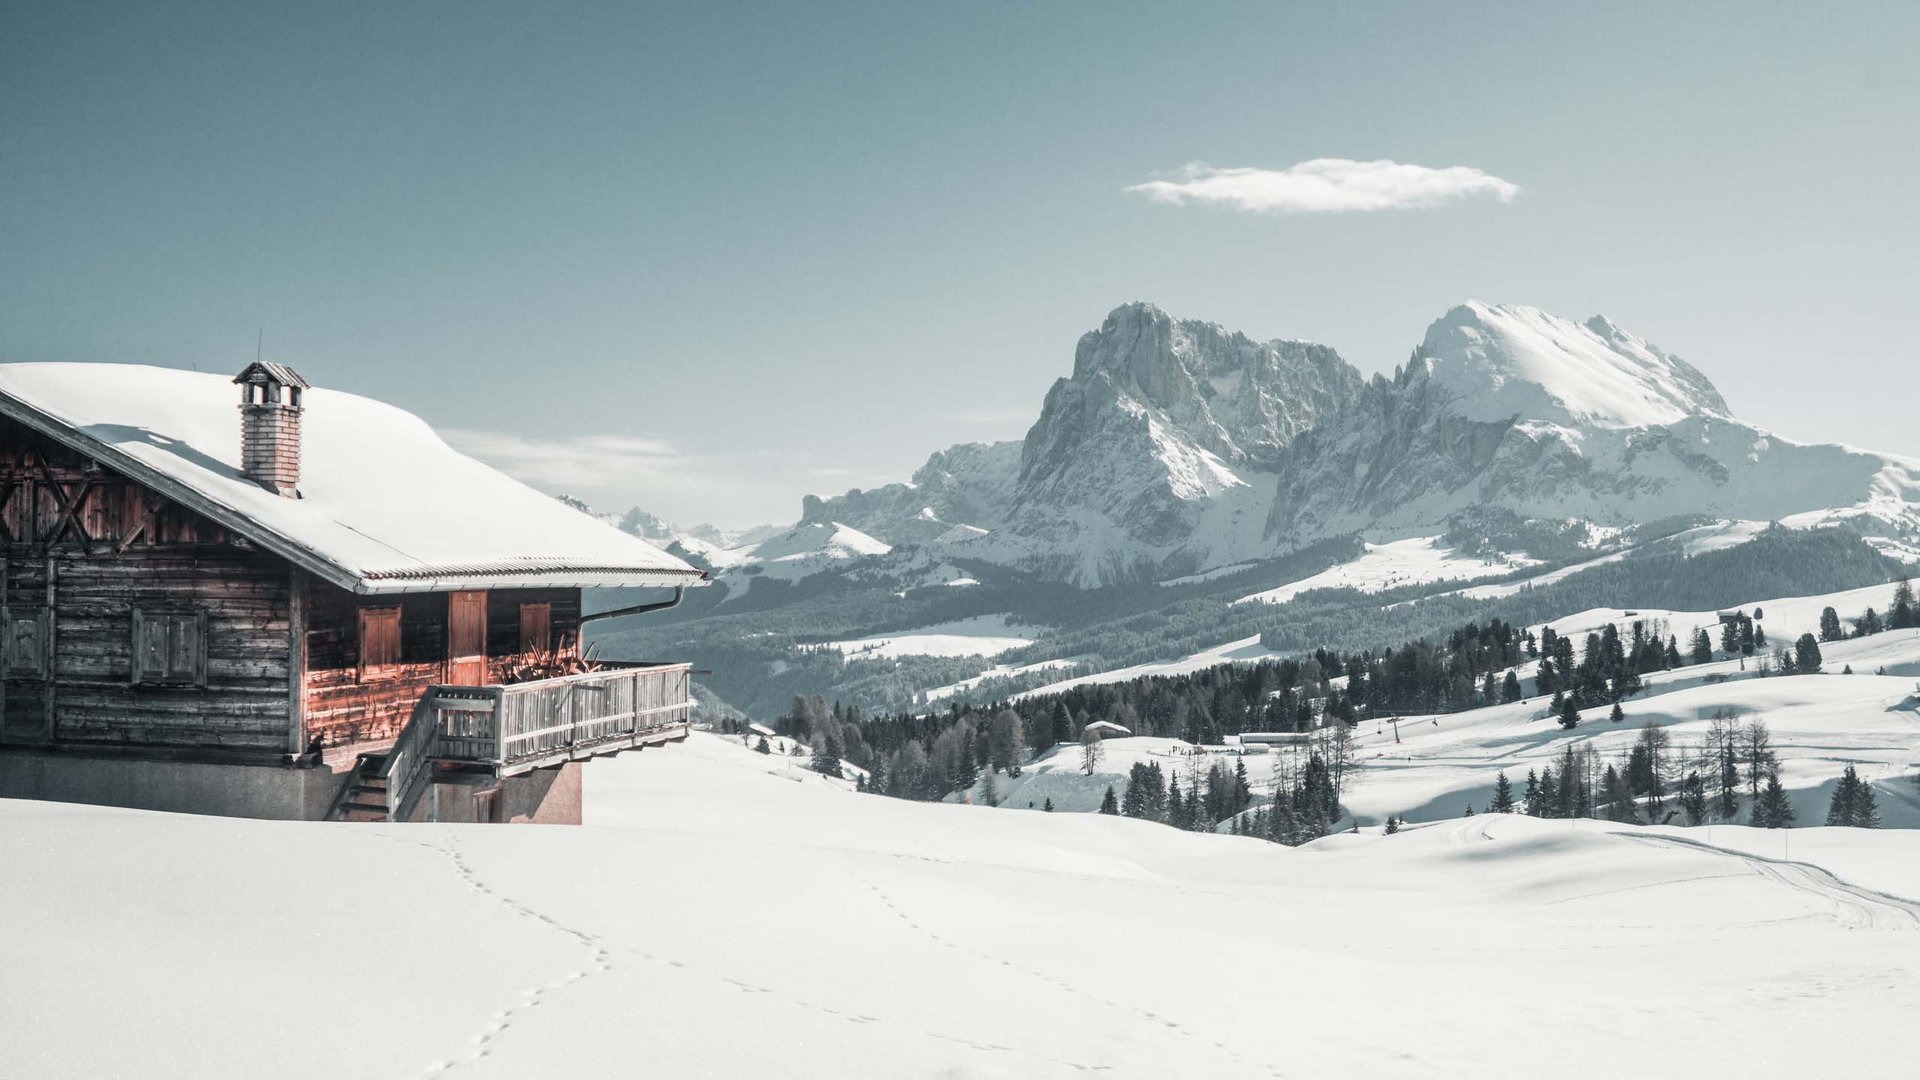 The Dolomites – skiing holidays and so much more